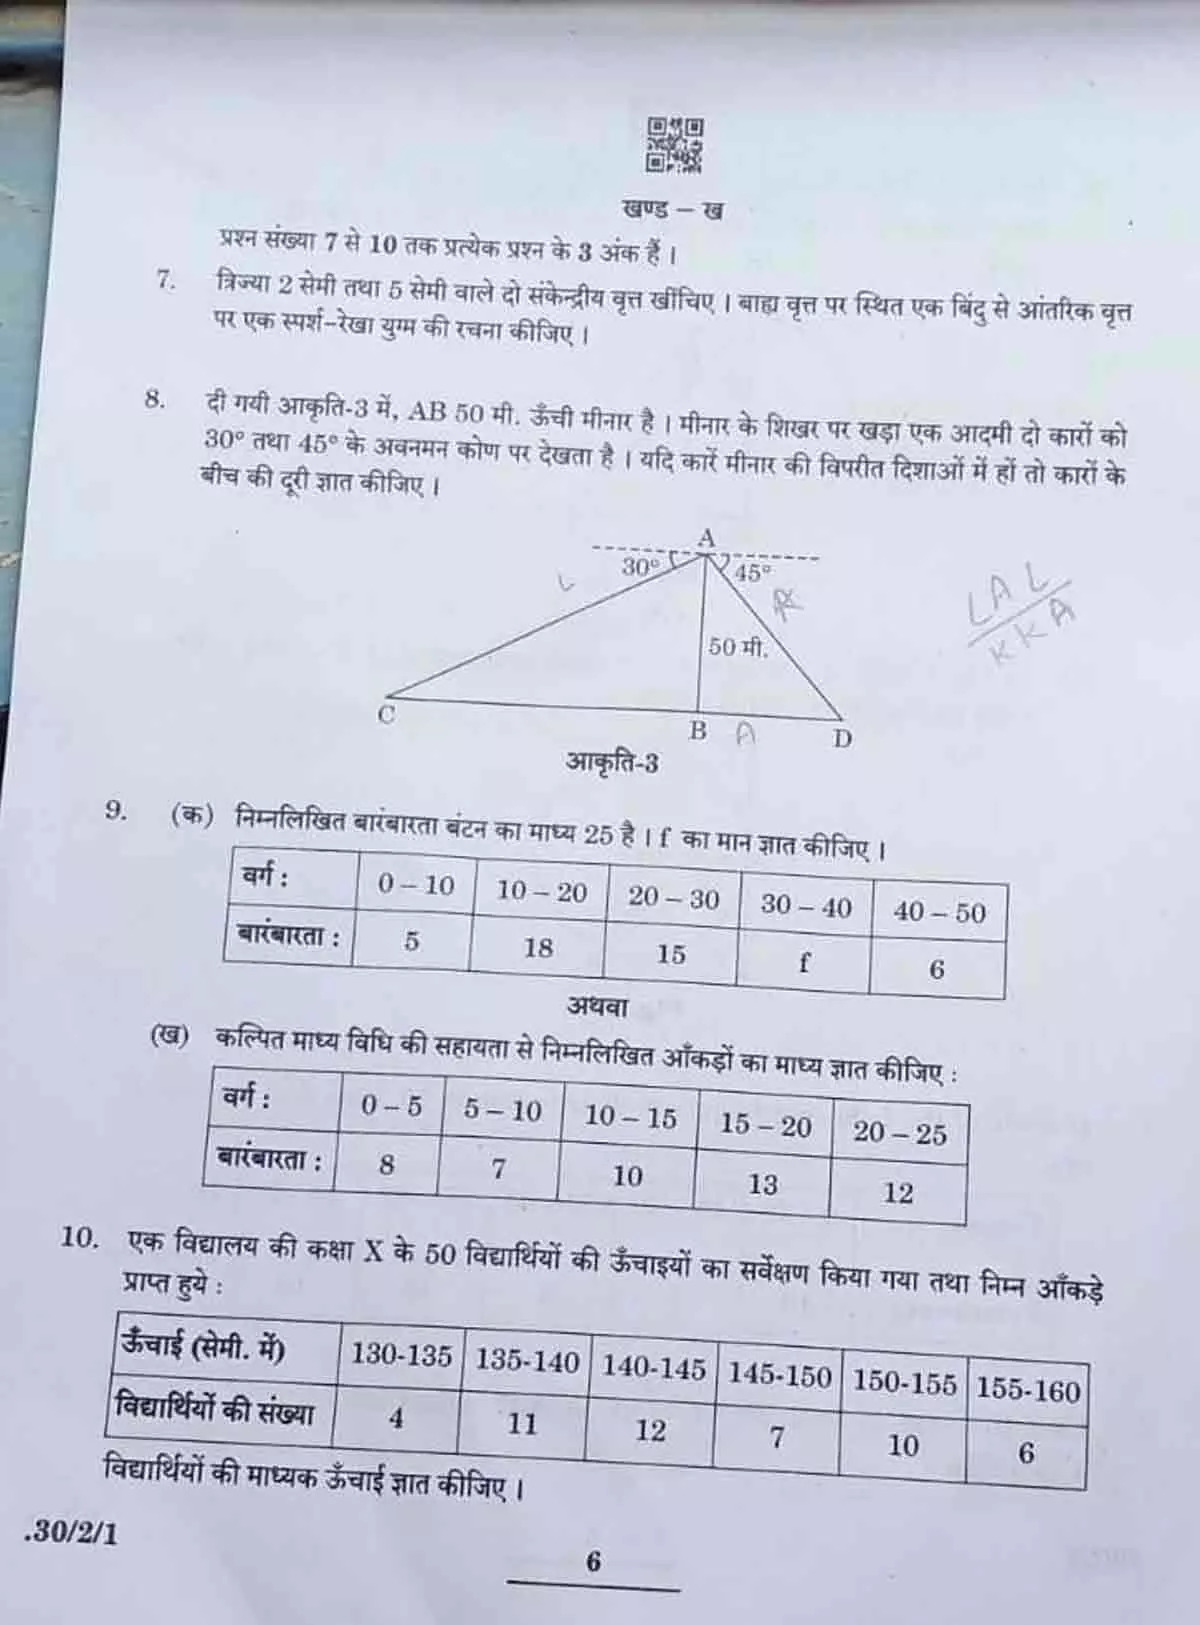 CBSE Class 10th Question Paper Page 6